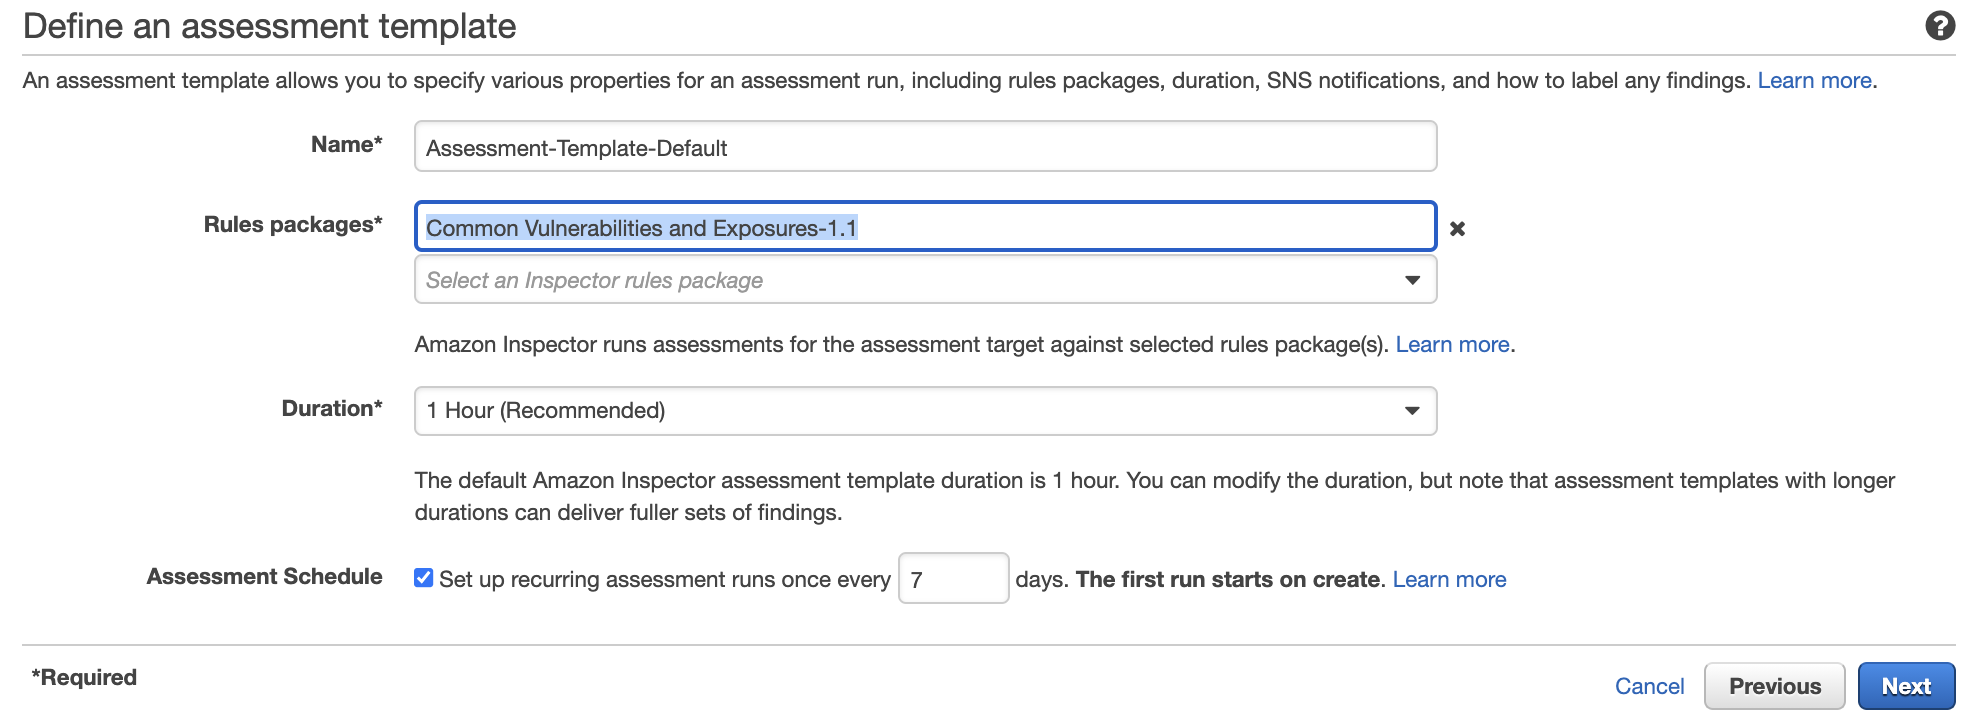 Define an assessment template

e

An assessment template allows you to specify various properties for an assessment run, including rules packages, duration, SNS notifications, and how to label any findings. Learn more.

Name*

Rules packages*

Duration*

Assessment Schedule

*Required

Assessment-Template-Default

Common Vulnerabilities and Exposures-1.1 x

Select an Inspector rules package

Amazon Inspector runs assessments for the assessment target against selected rules package(s). Learn more.

1 Hour (Recommended)

v

The default Amazon Inspector assessment template duration is 1 hour. You can modify the duration, but note that assessment templates with longer

durations can deliver fuller sets of findings.

Set up recurring assessment runs once every 7

days. The first run starts on create. Learn more

Cancel Previous cS